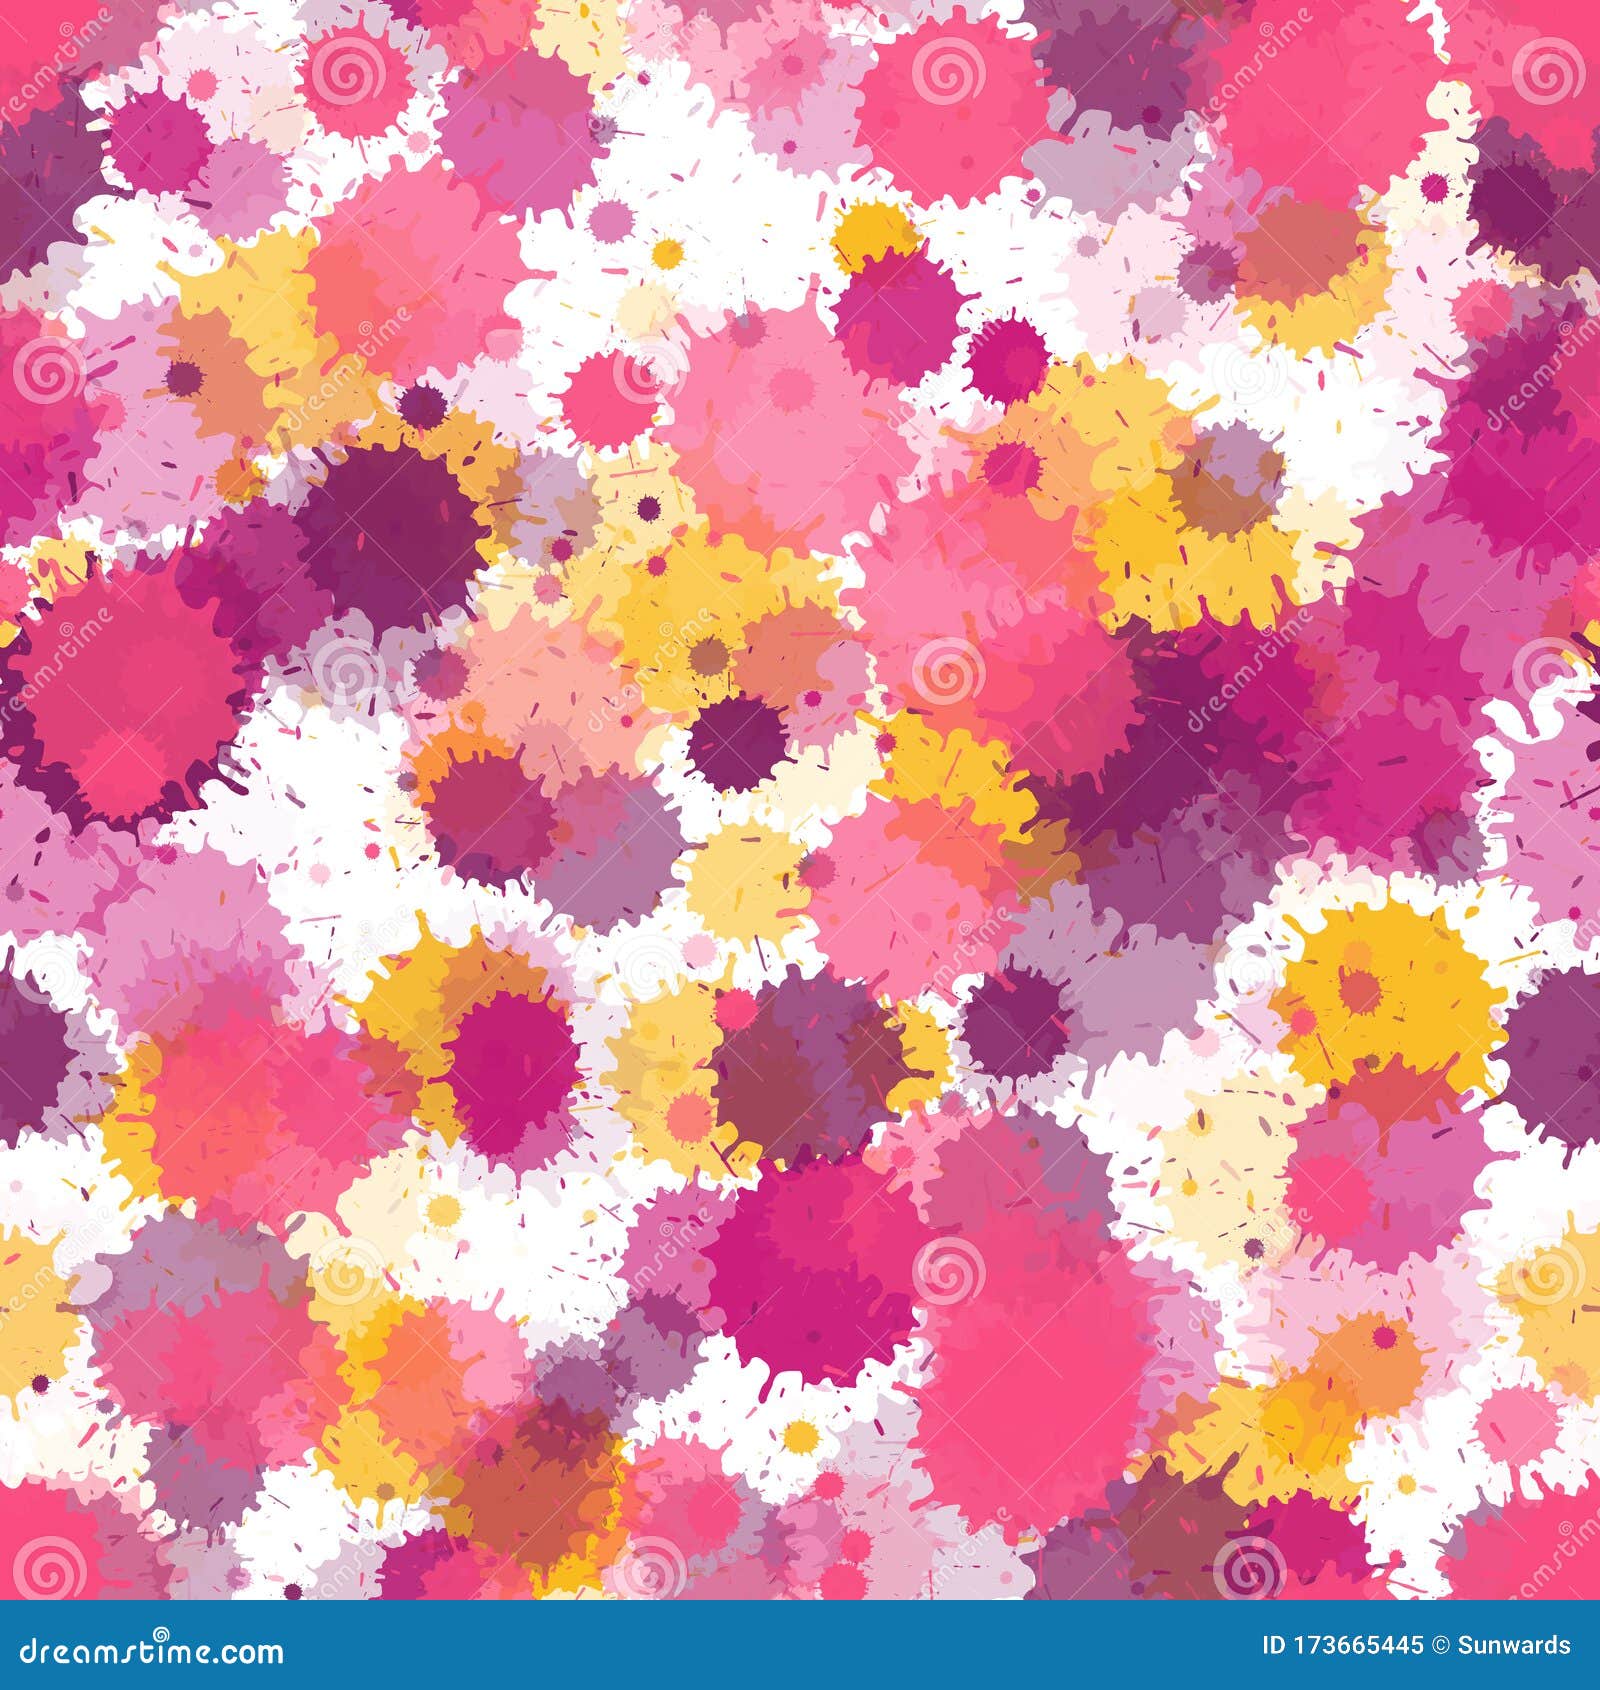 Paint Stains Vivid Seamless Pattern Stock Vector - Illustration of ...